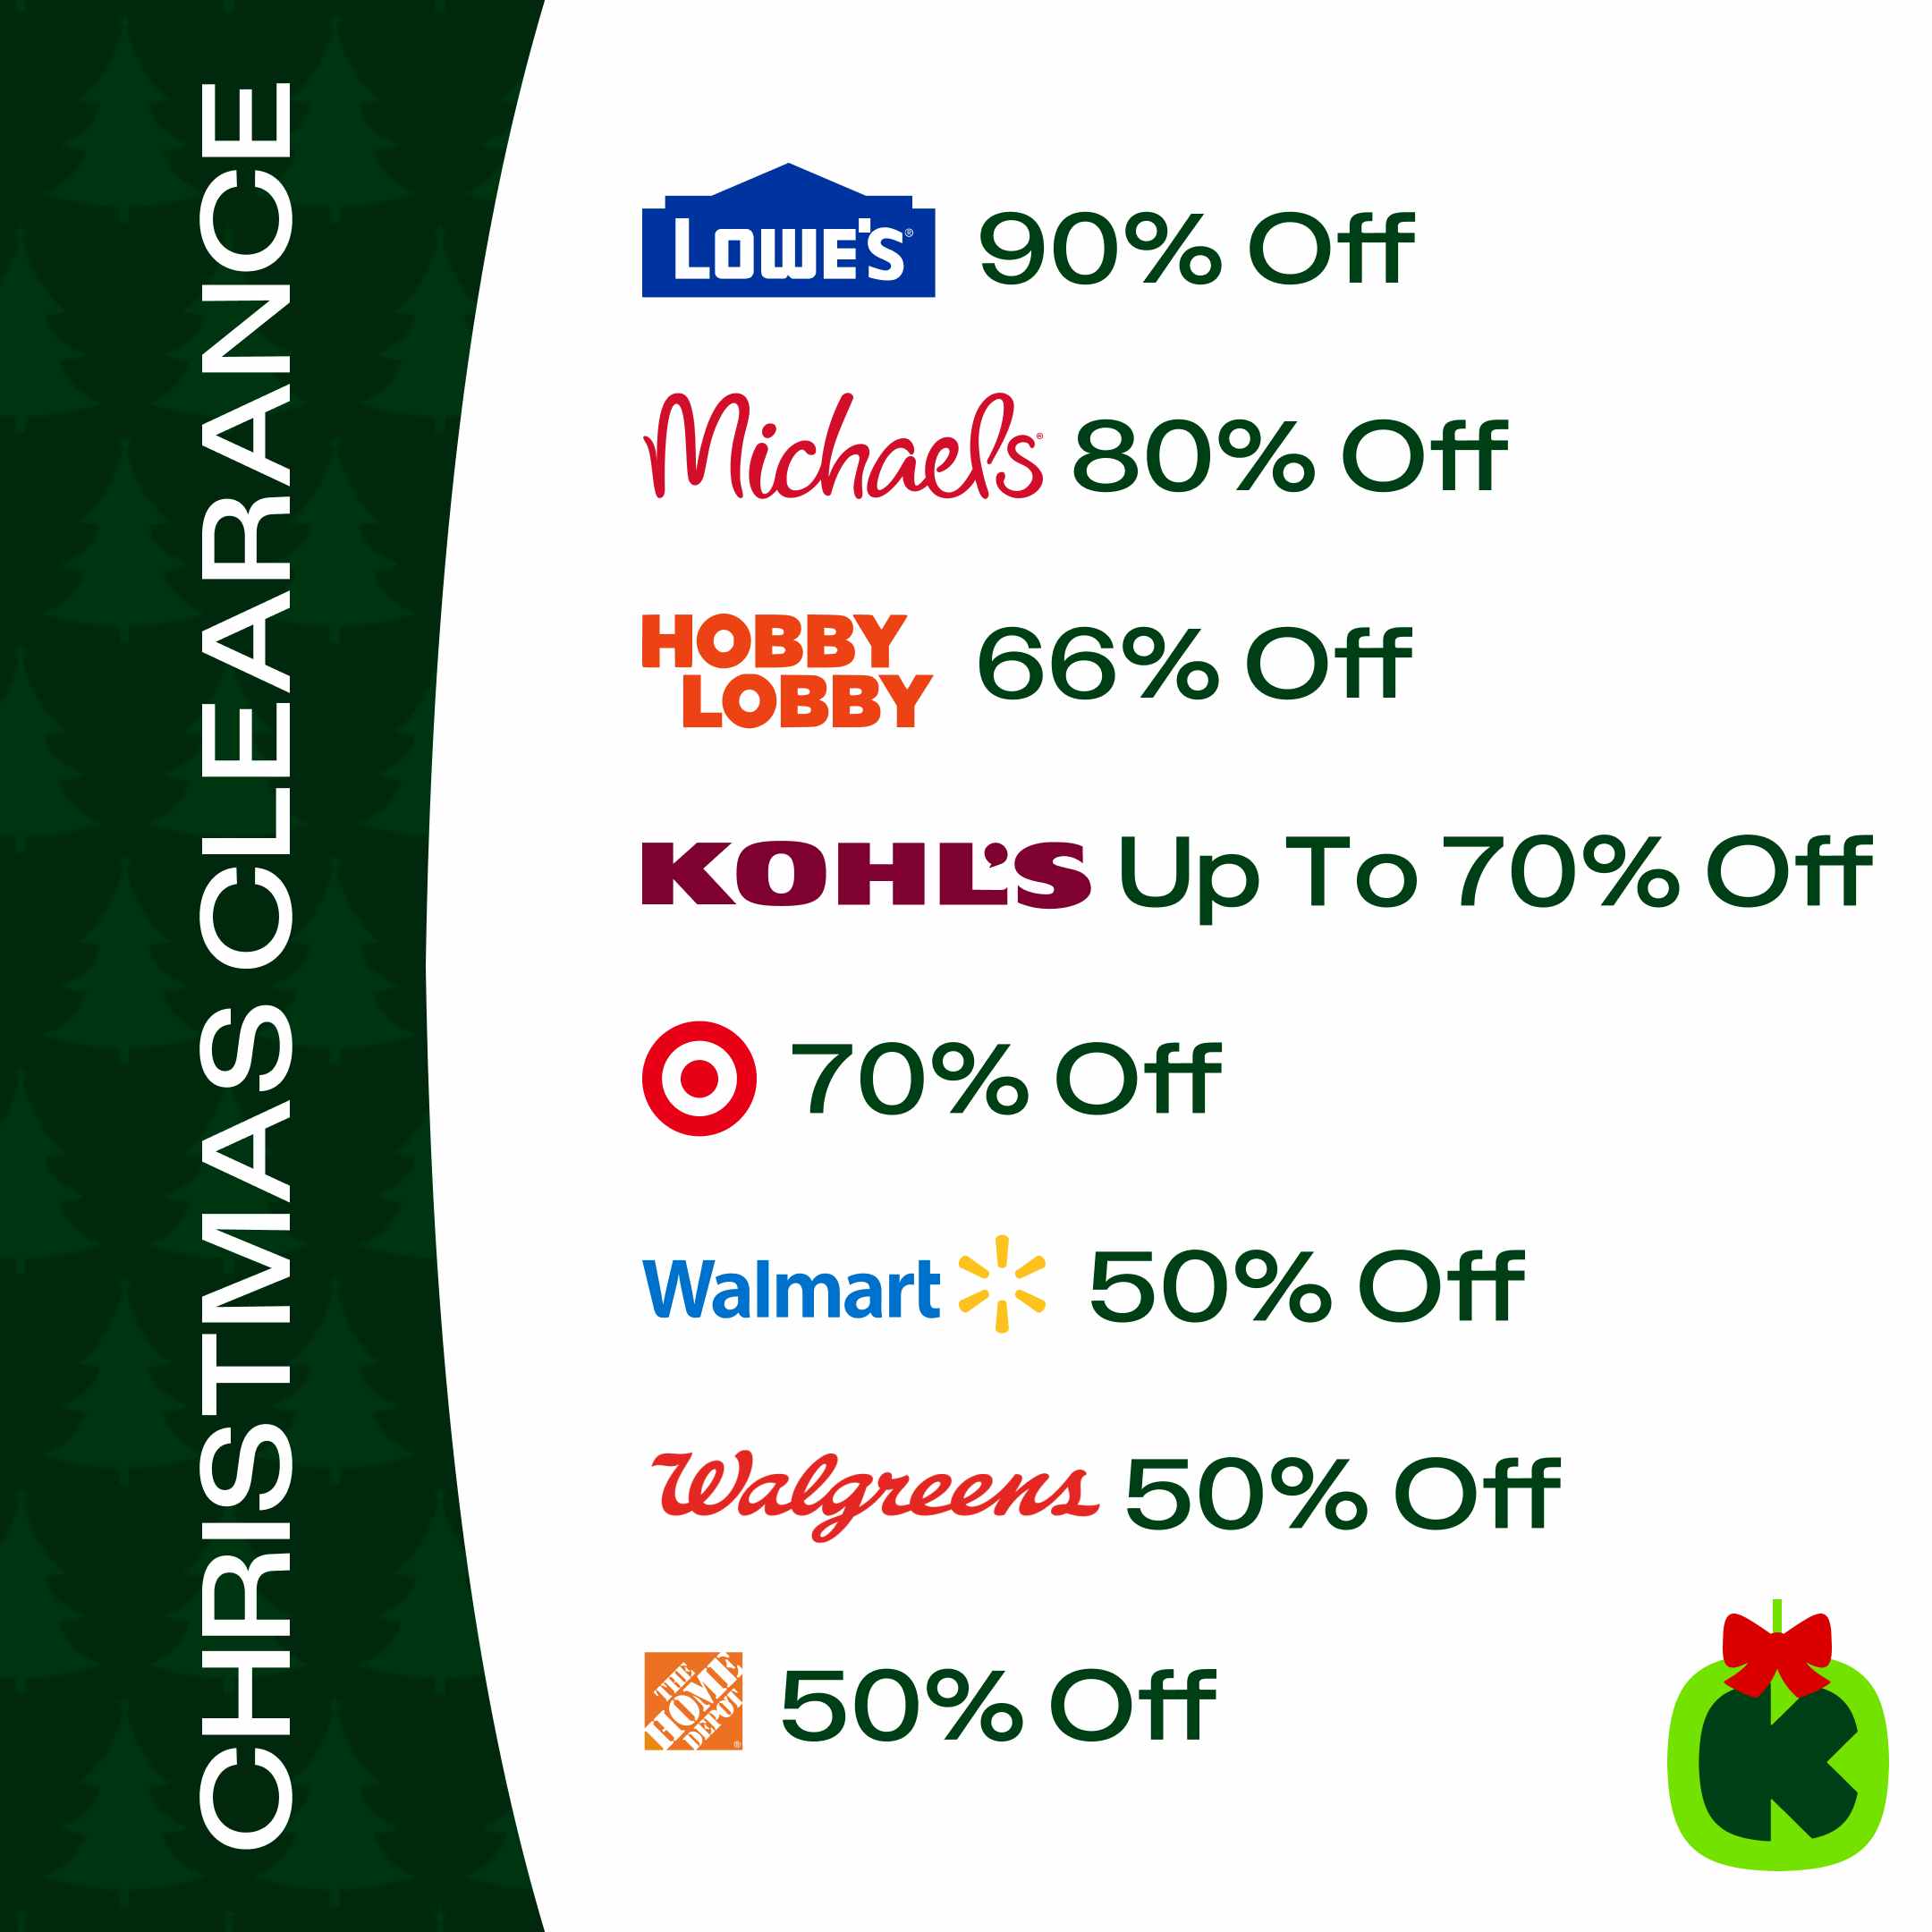 The After Christmas Clearance Schedules to Memorize for 90% Off